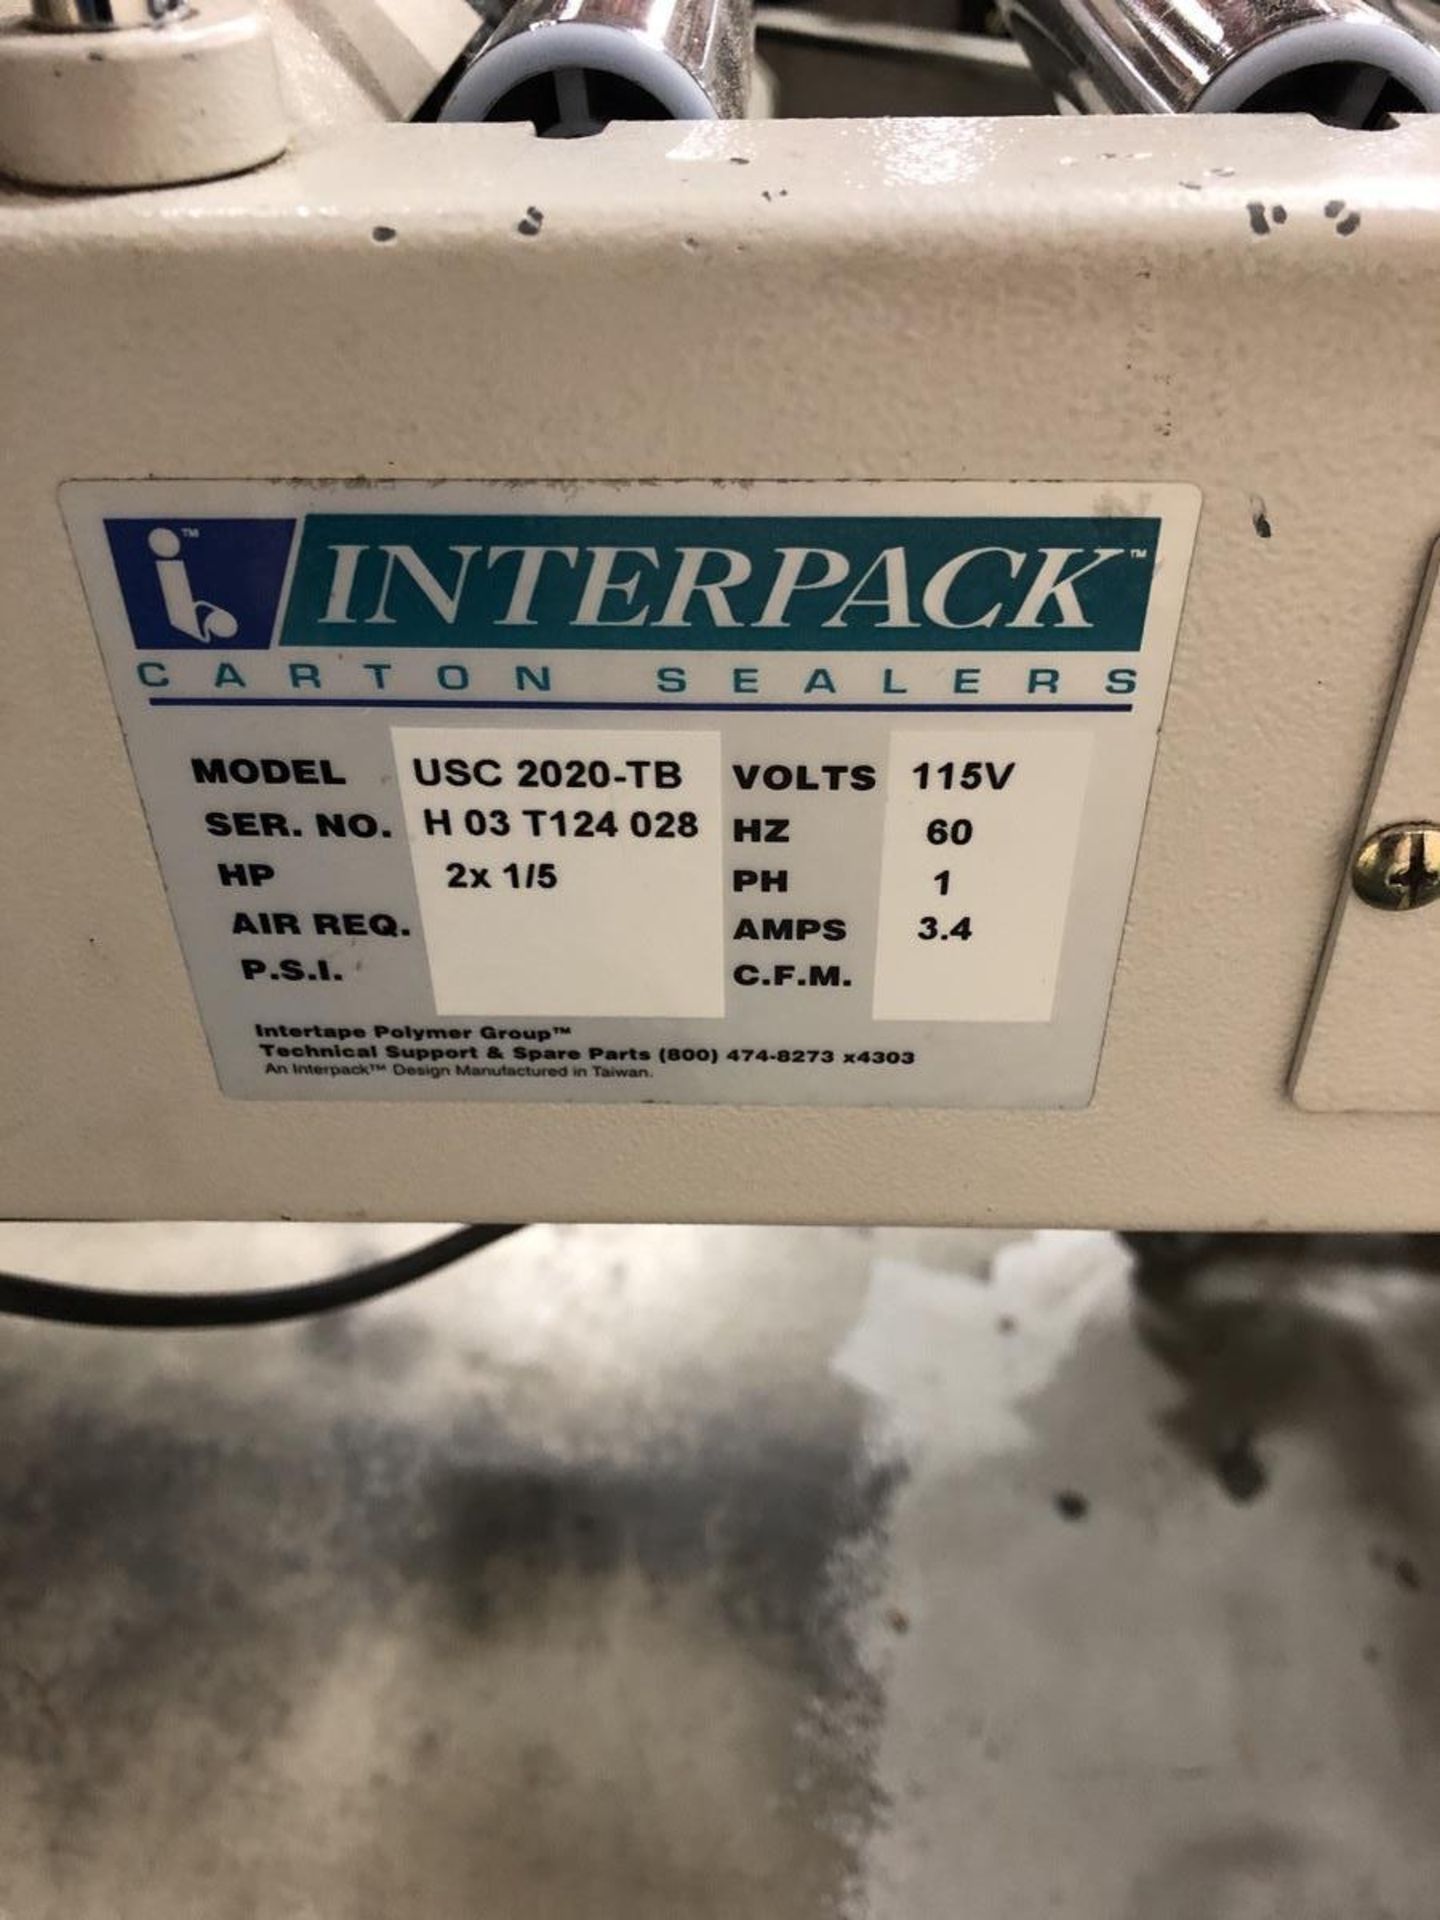 Interpack Model USC 2020-TB Top And Bottom Box Taper, S/N: H03 T124 028 | Rig Fee: $75 - Image 4 of 4